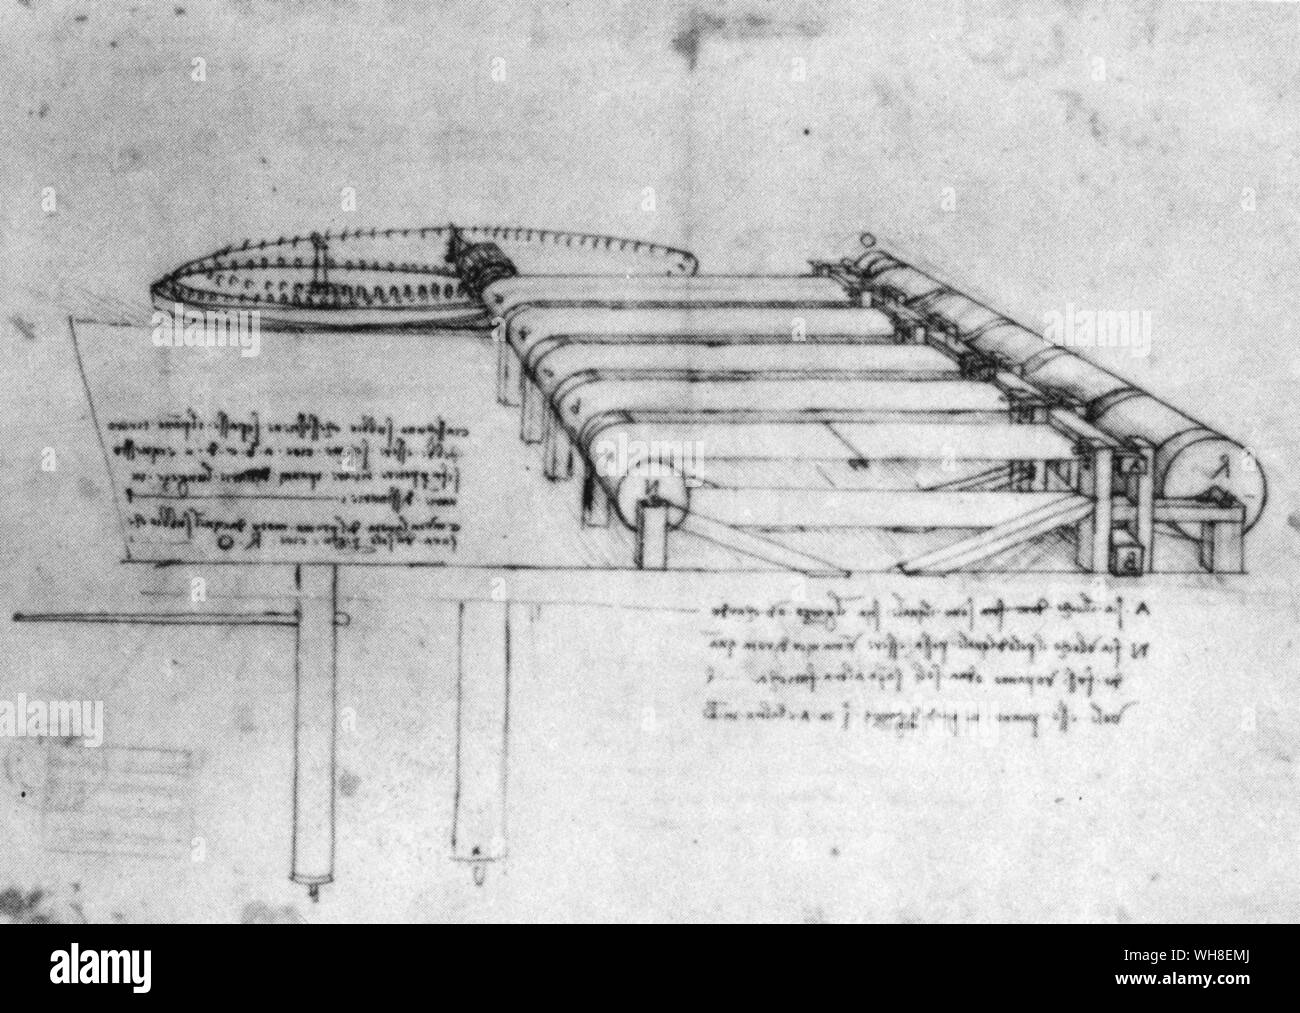 Leonardo's teaseling machine, showing five lengths of cloth stretched between two rollers. Leonardo da Vinci (1452-1519) was an Italian Renaissance architect, musician, anatomist, inventor, engineer, sculptor, geometer and artist. . . Stock Photo